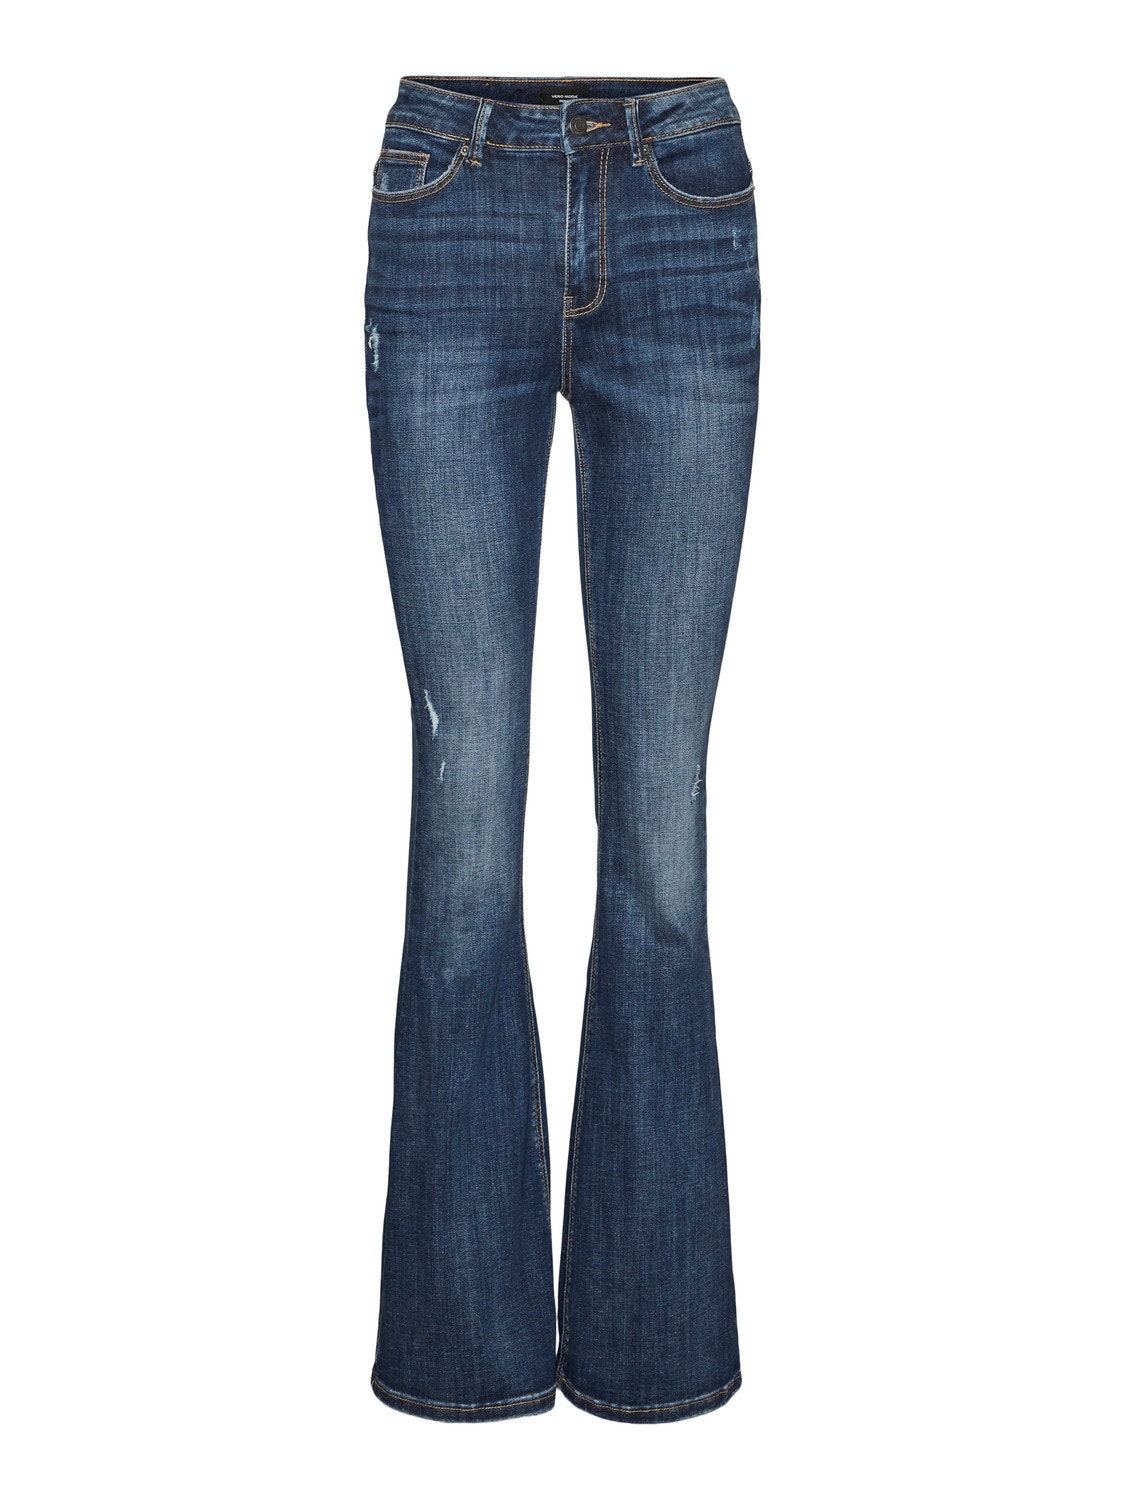 VMSIGA High rise Skinny Fit Jeans with 35% discount!